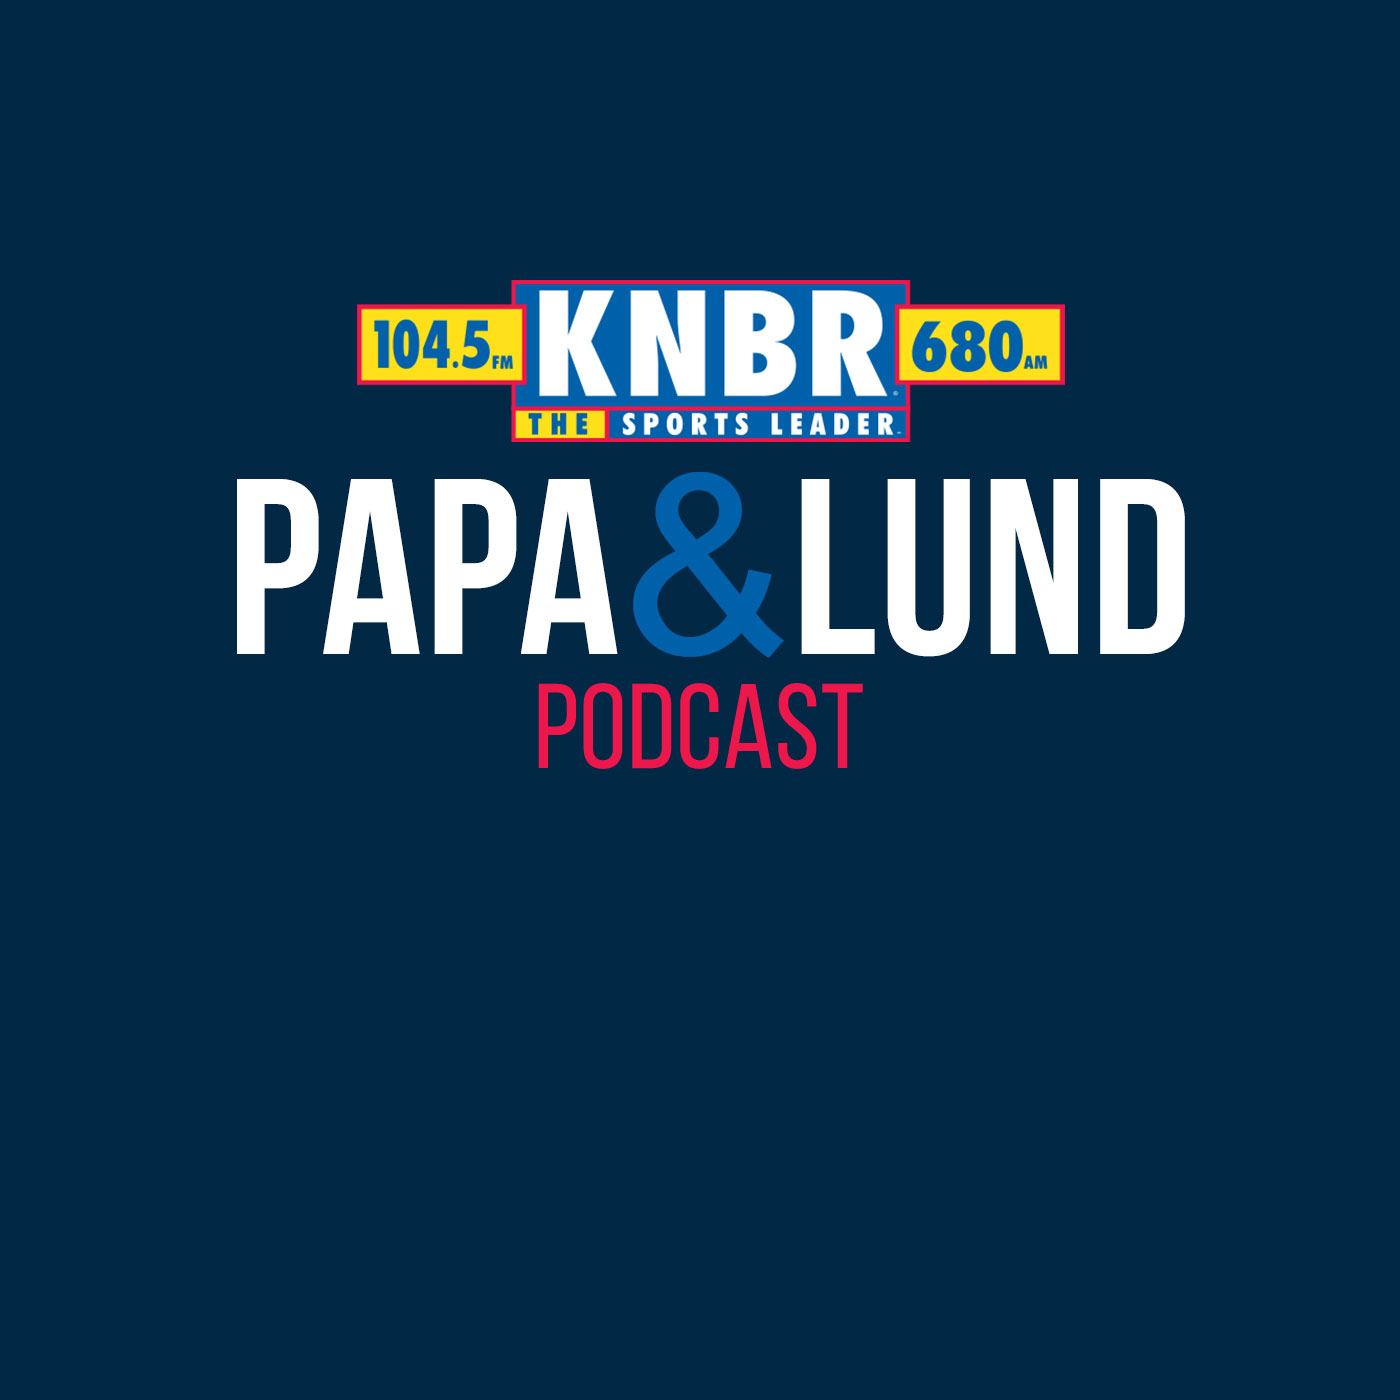 12-03 Matt Maiocco joins Papa & Copes to give an update on the 49ers ahead of their road game in Seattle